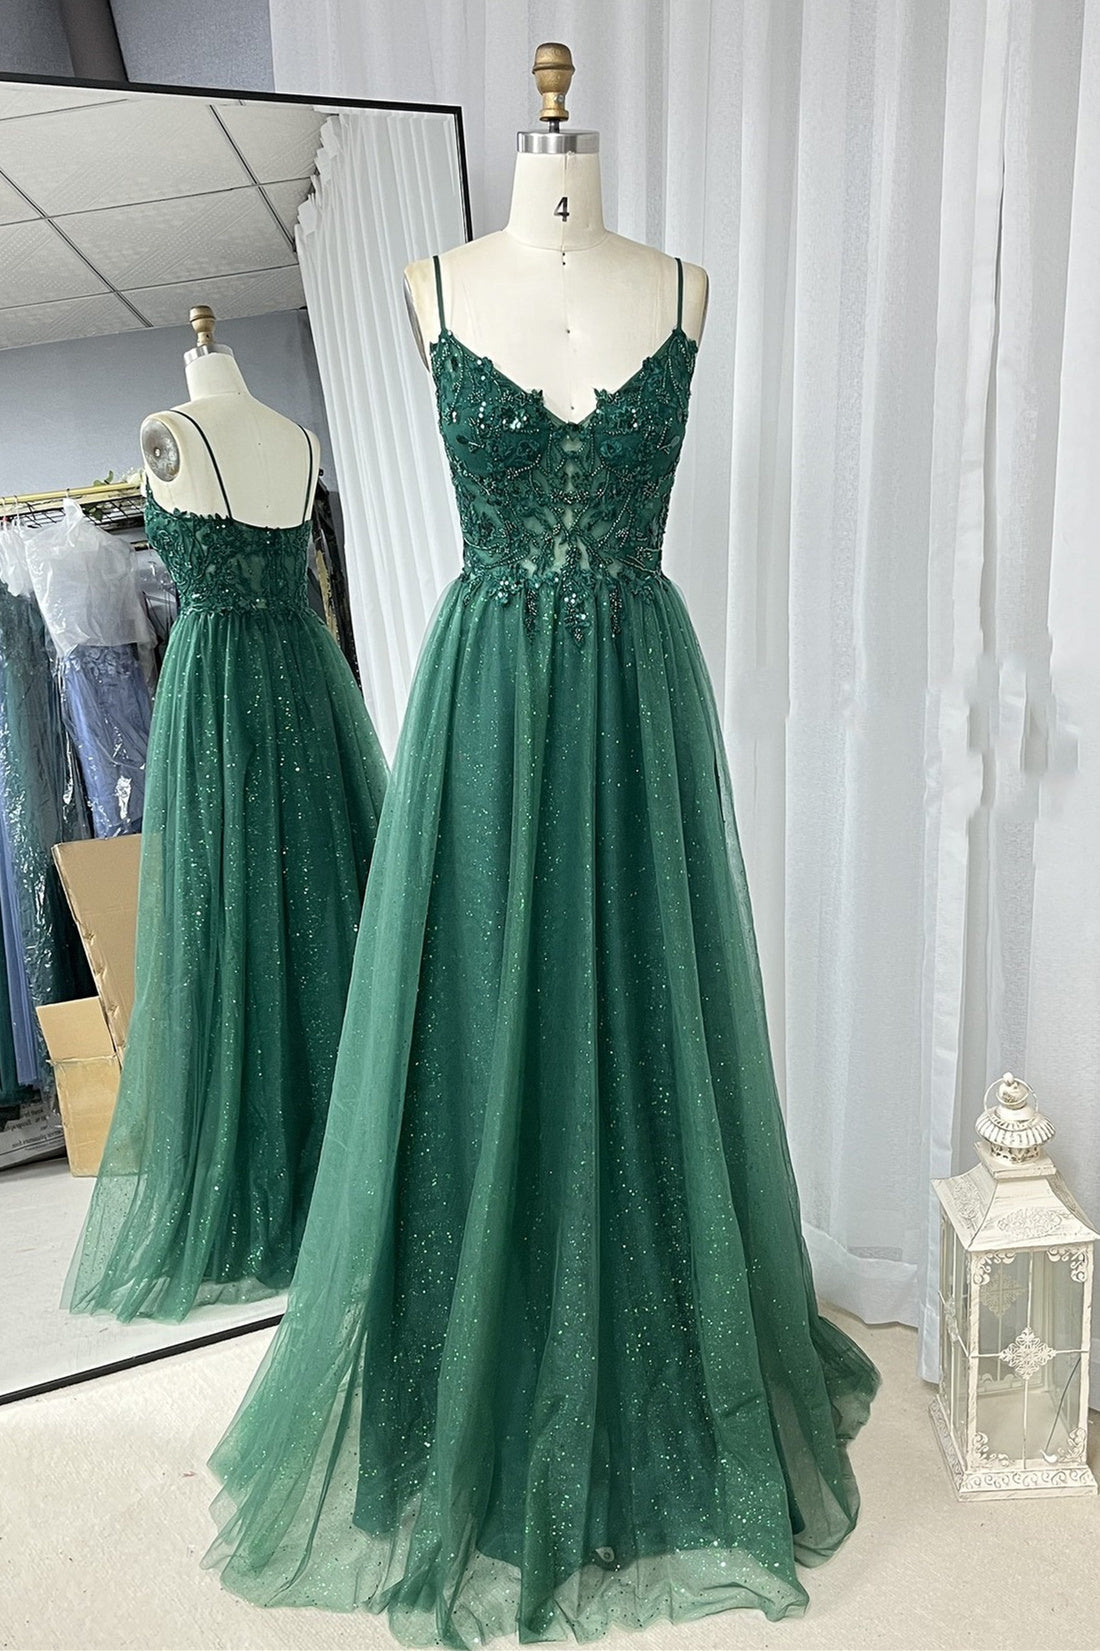 Hunter Green A-line Beaded Applique Straps Tulle Long Prom Dress